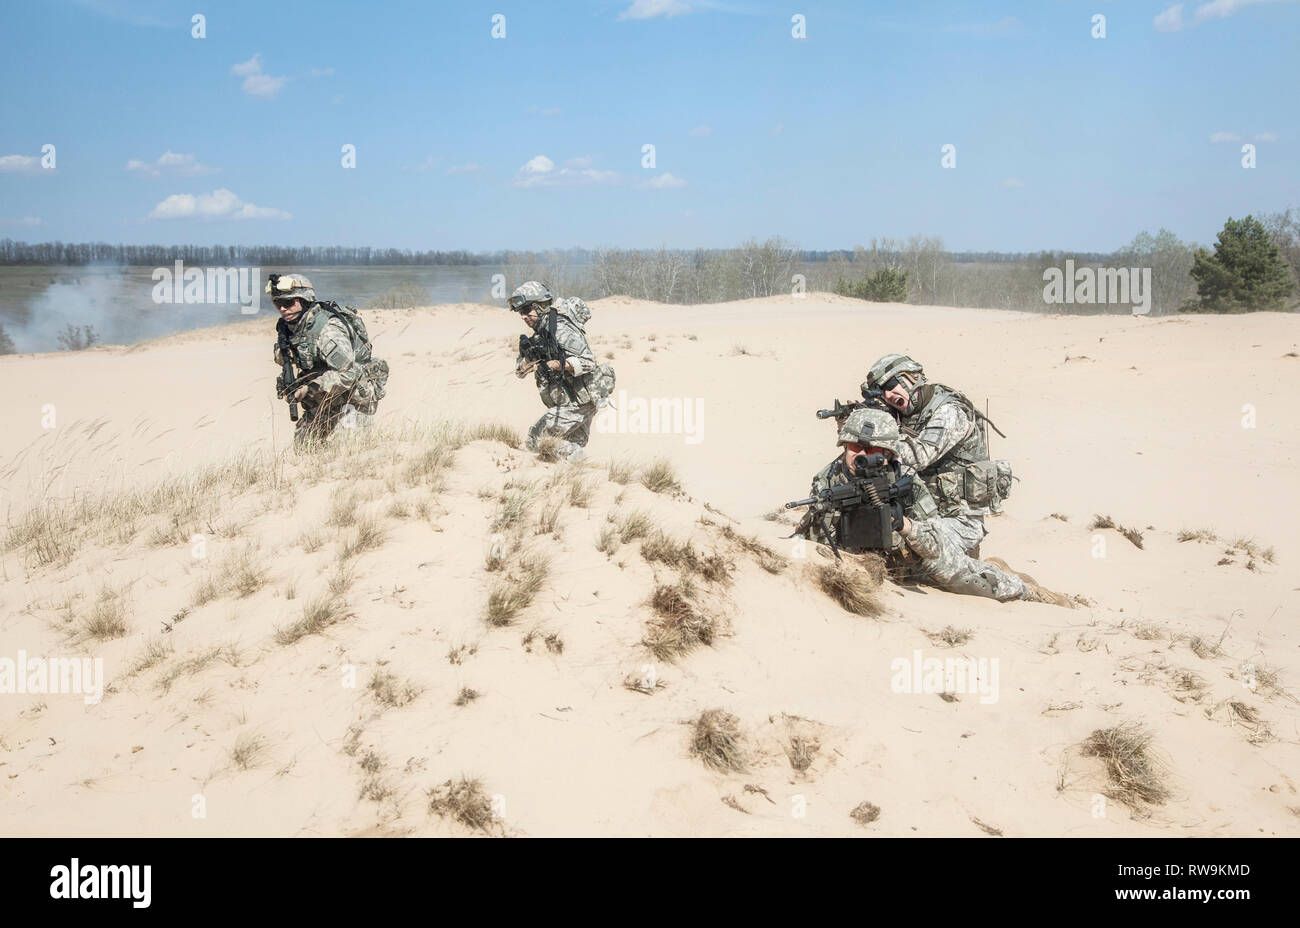 Team of United States airborne infantry men with weapons in action in desert. Stock Photo